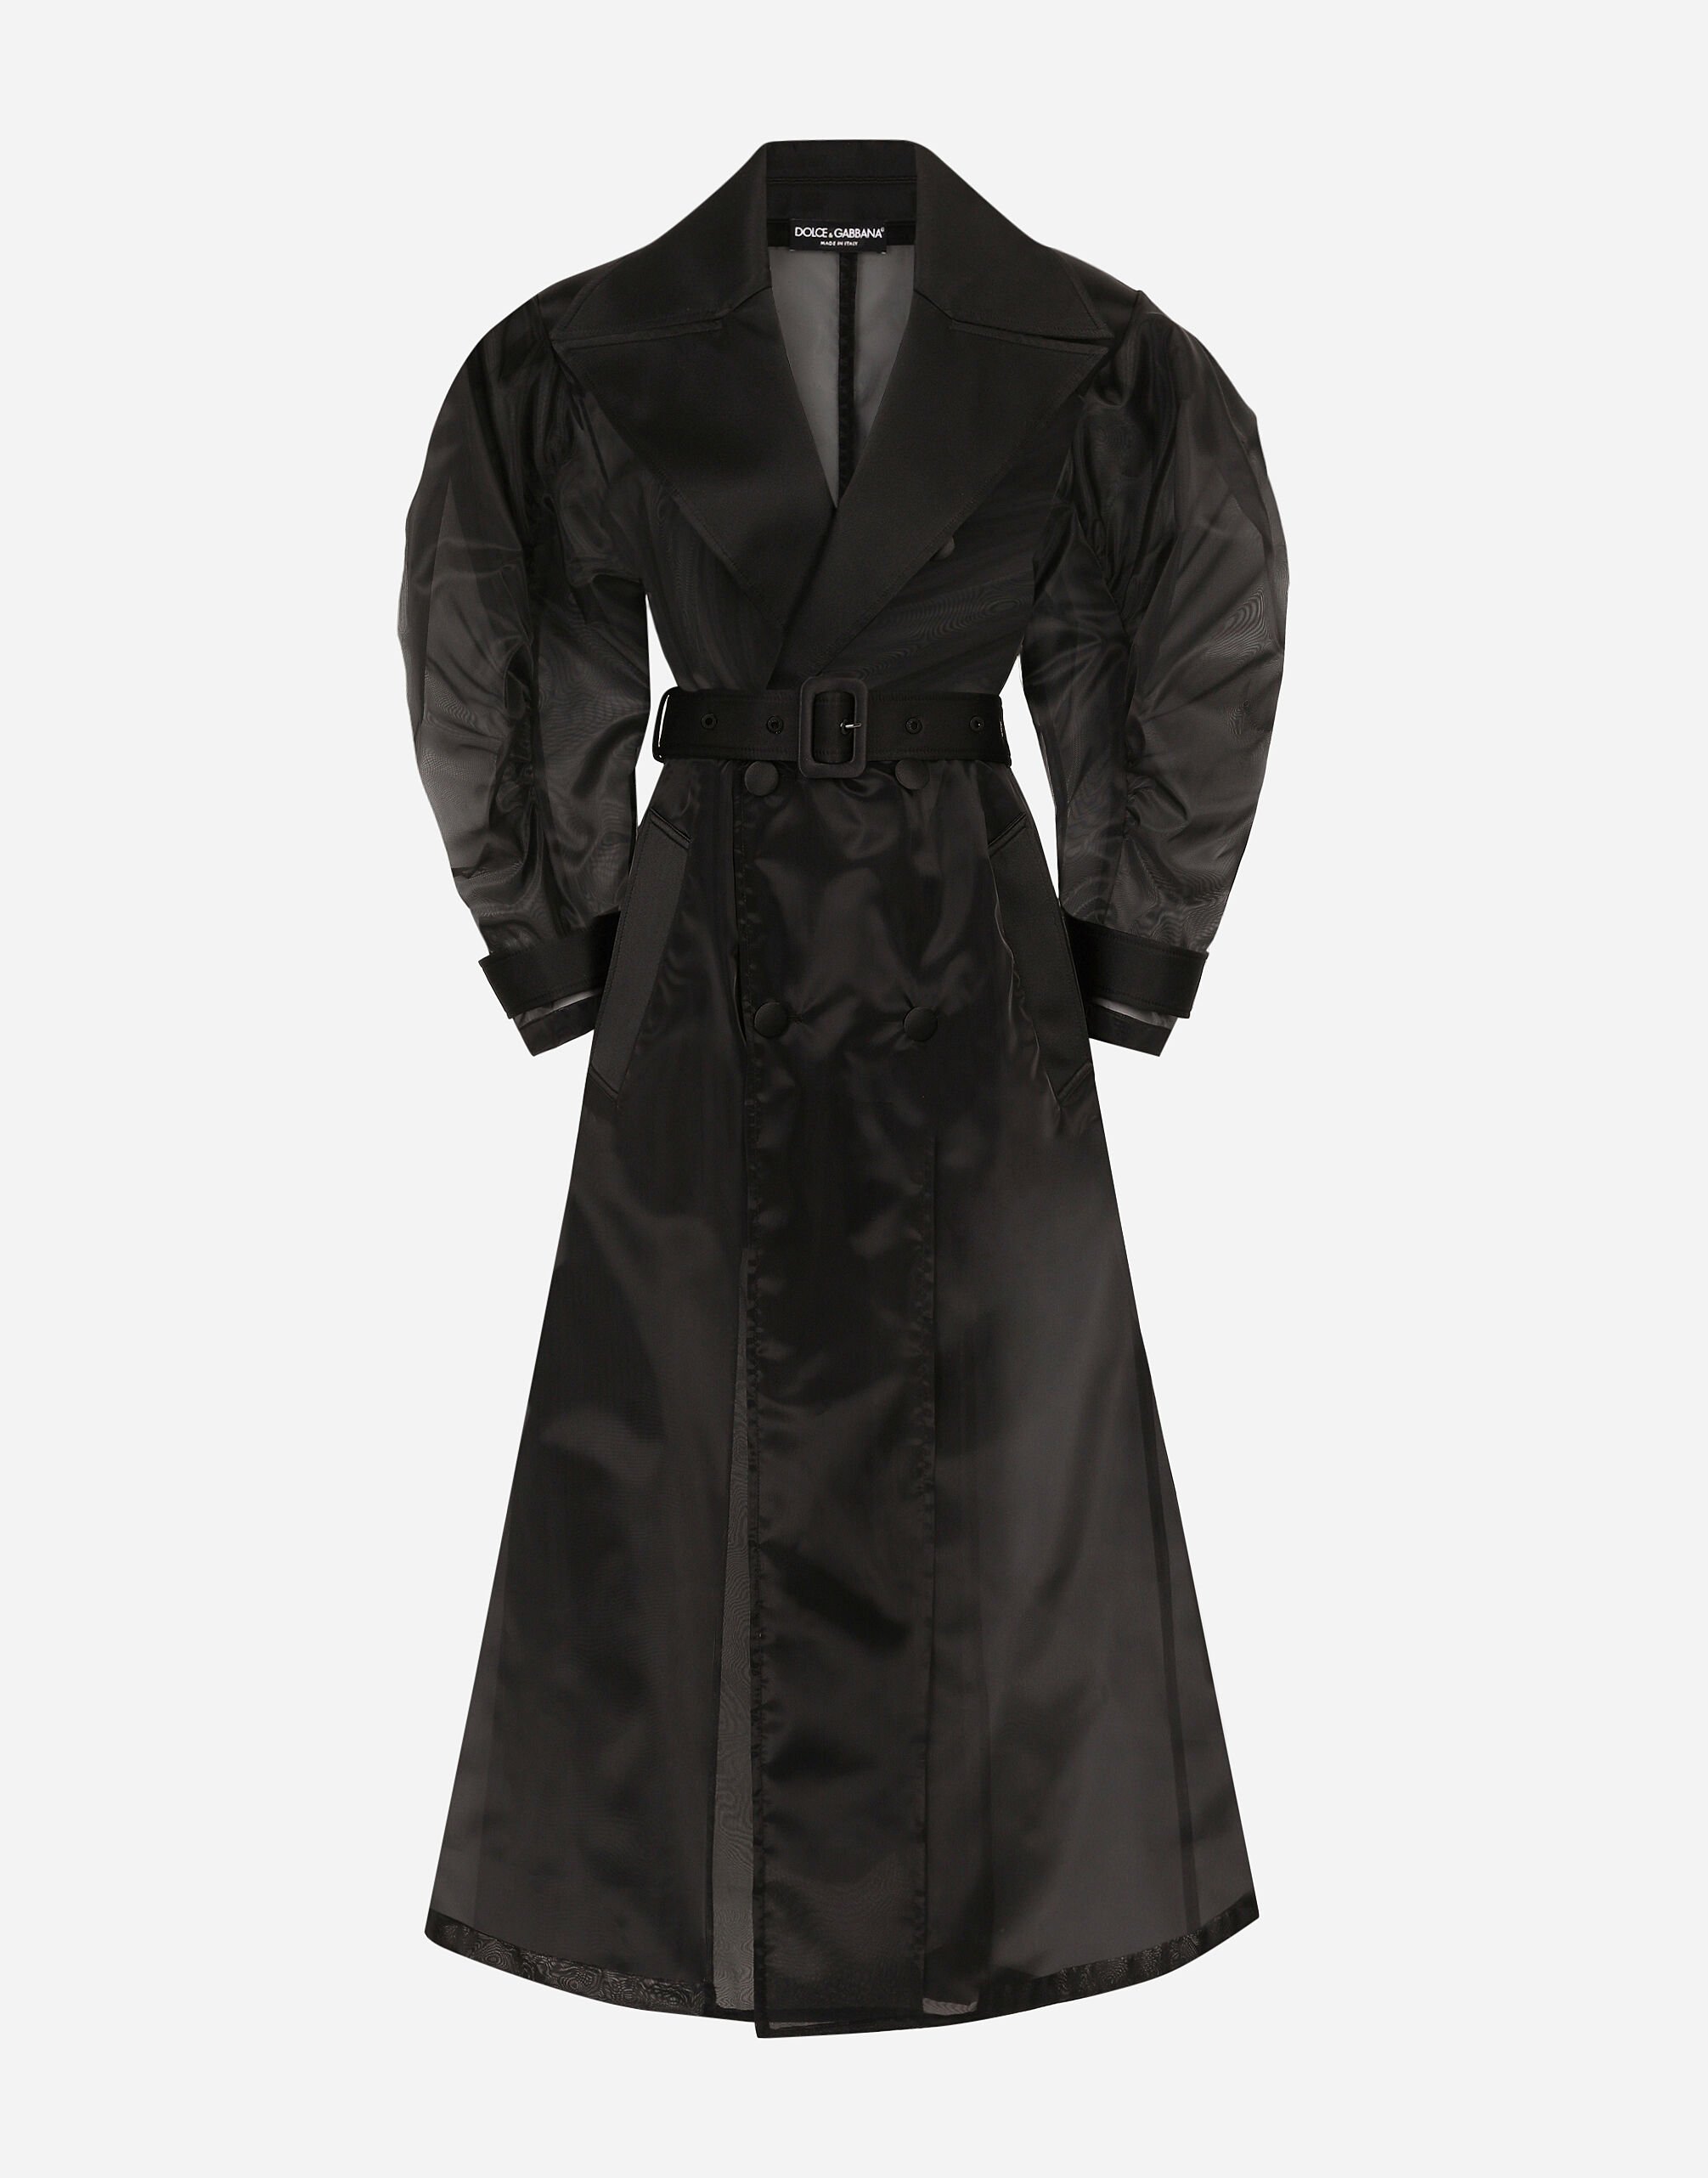 Dolce & Gabbana Technical organza trench coat with gathered sleeves Print F6DAOTFS8C3